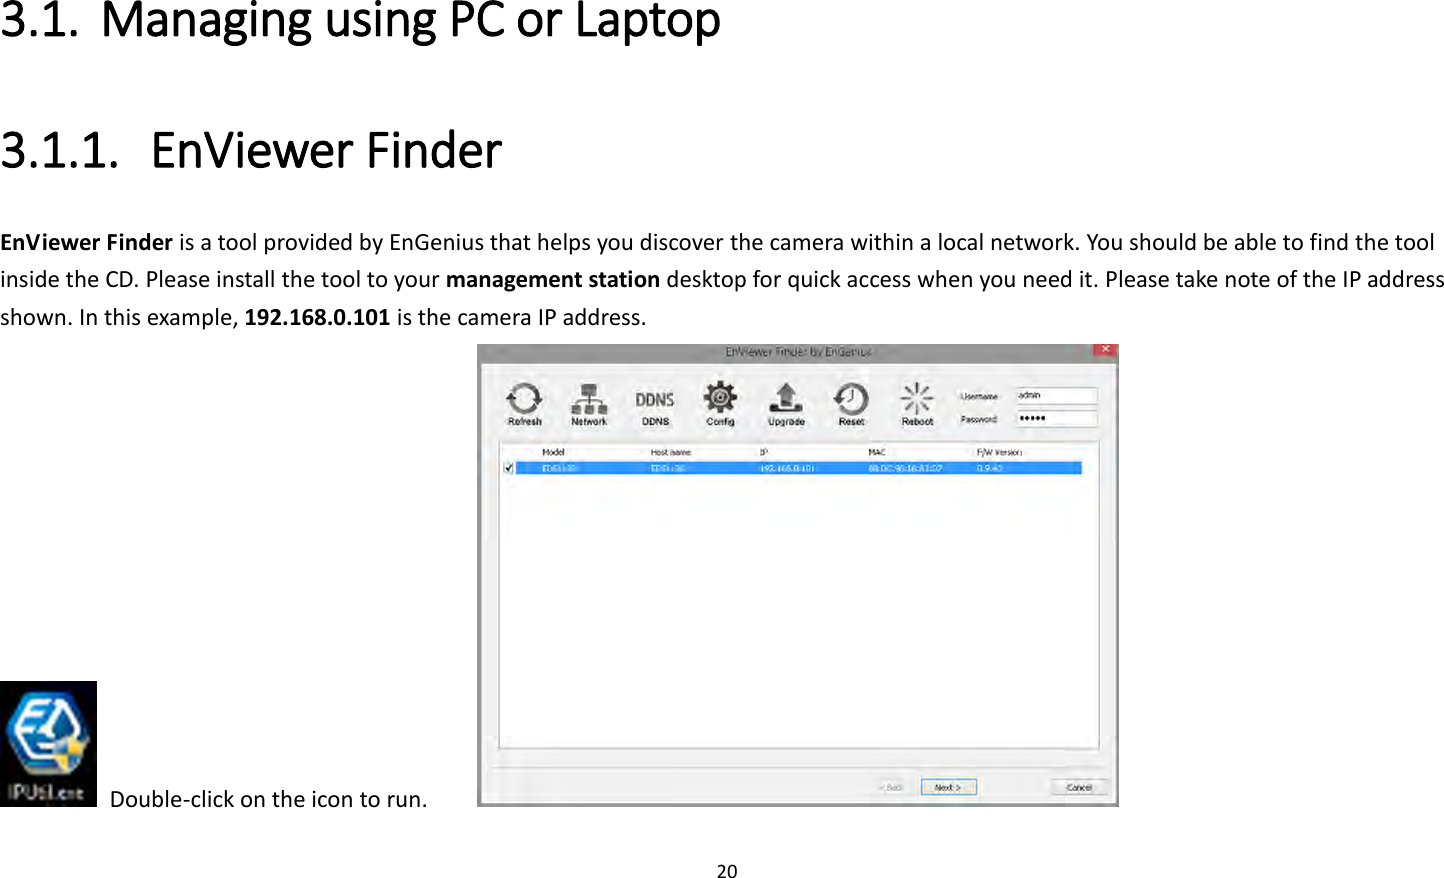 20  3.1. Managing using PC or Laptop 3.1.1. EnViewer Finder EnViewer Finder is a tool provided by EnGenius that helps you discover the camera within a local network. You should be able to find the tool inside the CD. Please install the tool to your management station desktop for quick access when you need it. Please take note of the IP address shown. In this example, 192.168.0.101 is the camera IP address.   Double-click on the icon to run.         